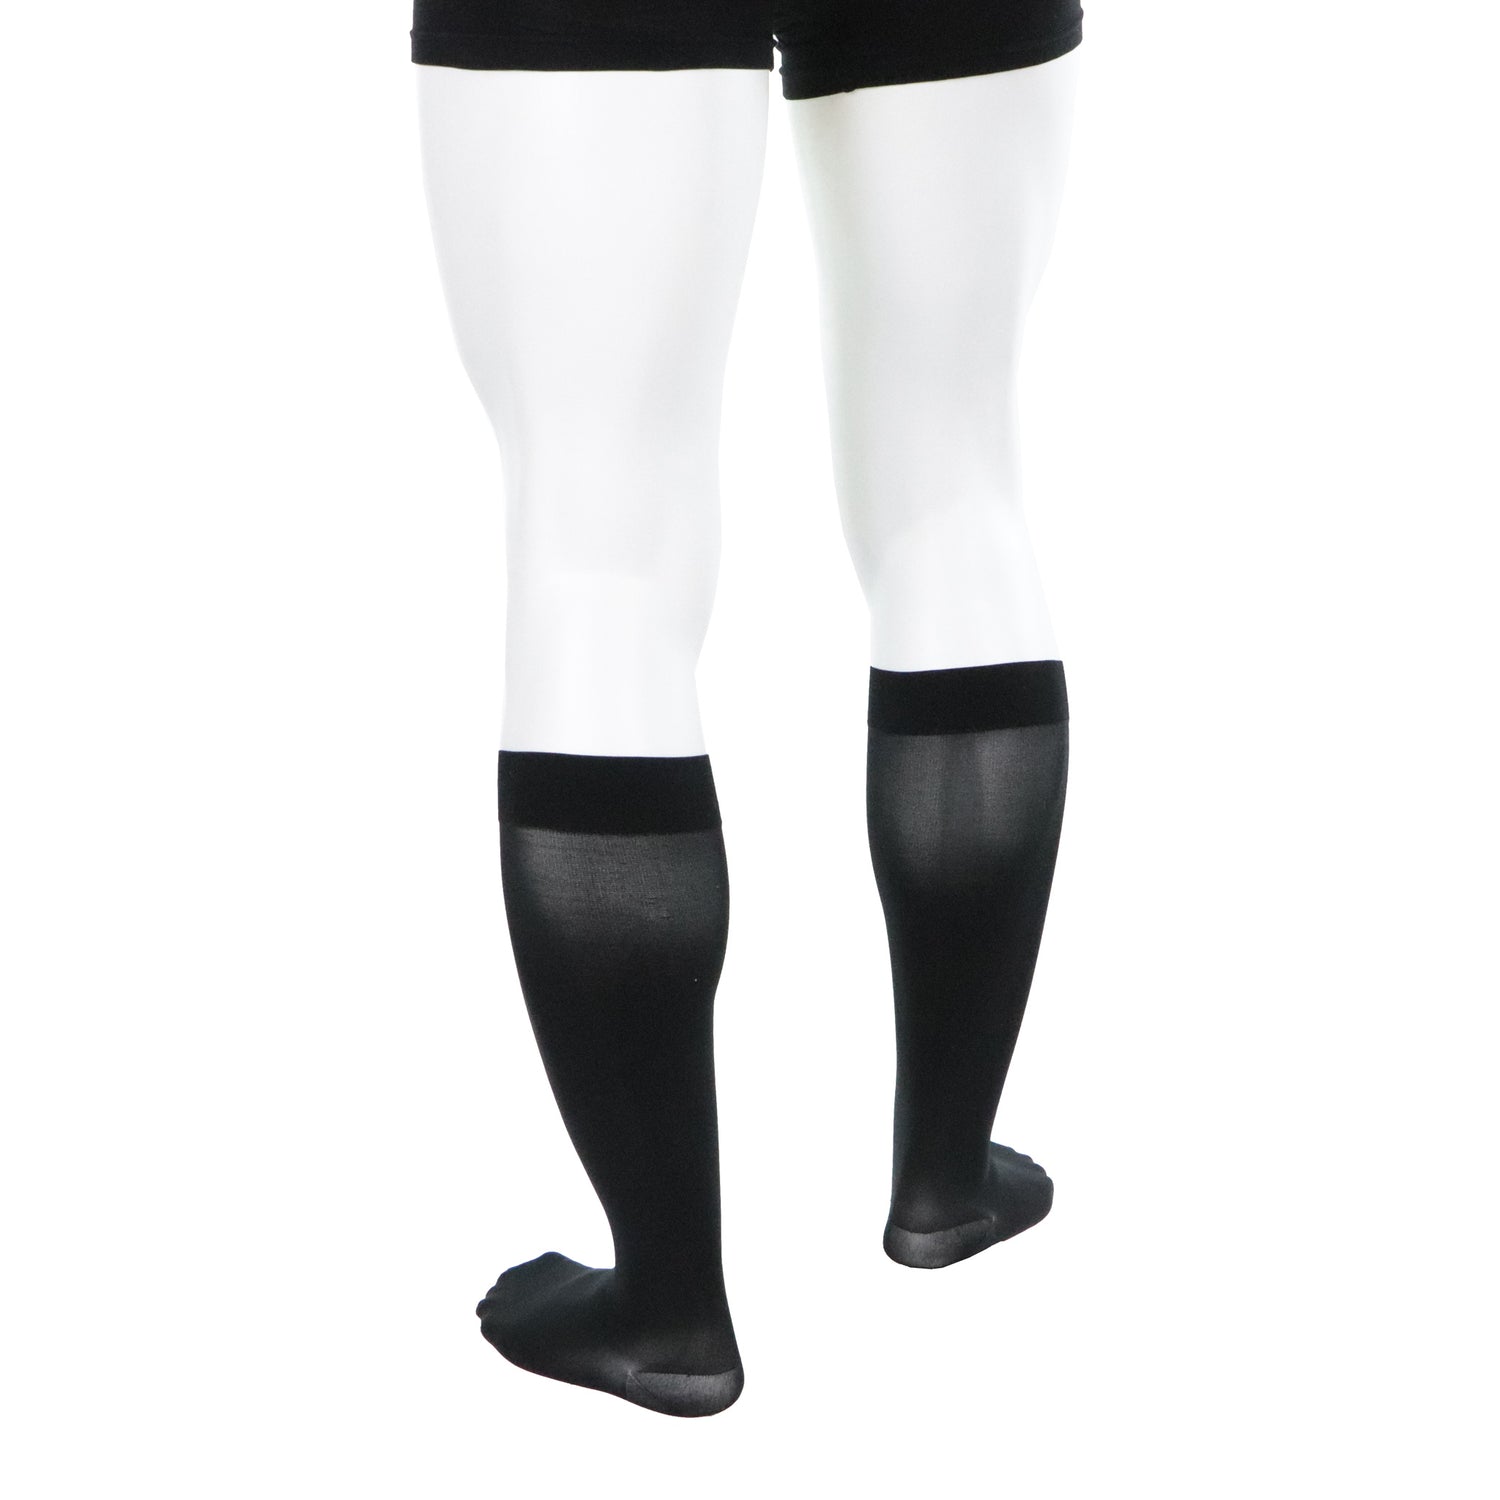 Everything you need to know about medium compression stockings 20-30 mmHg 